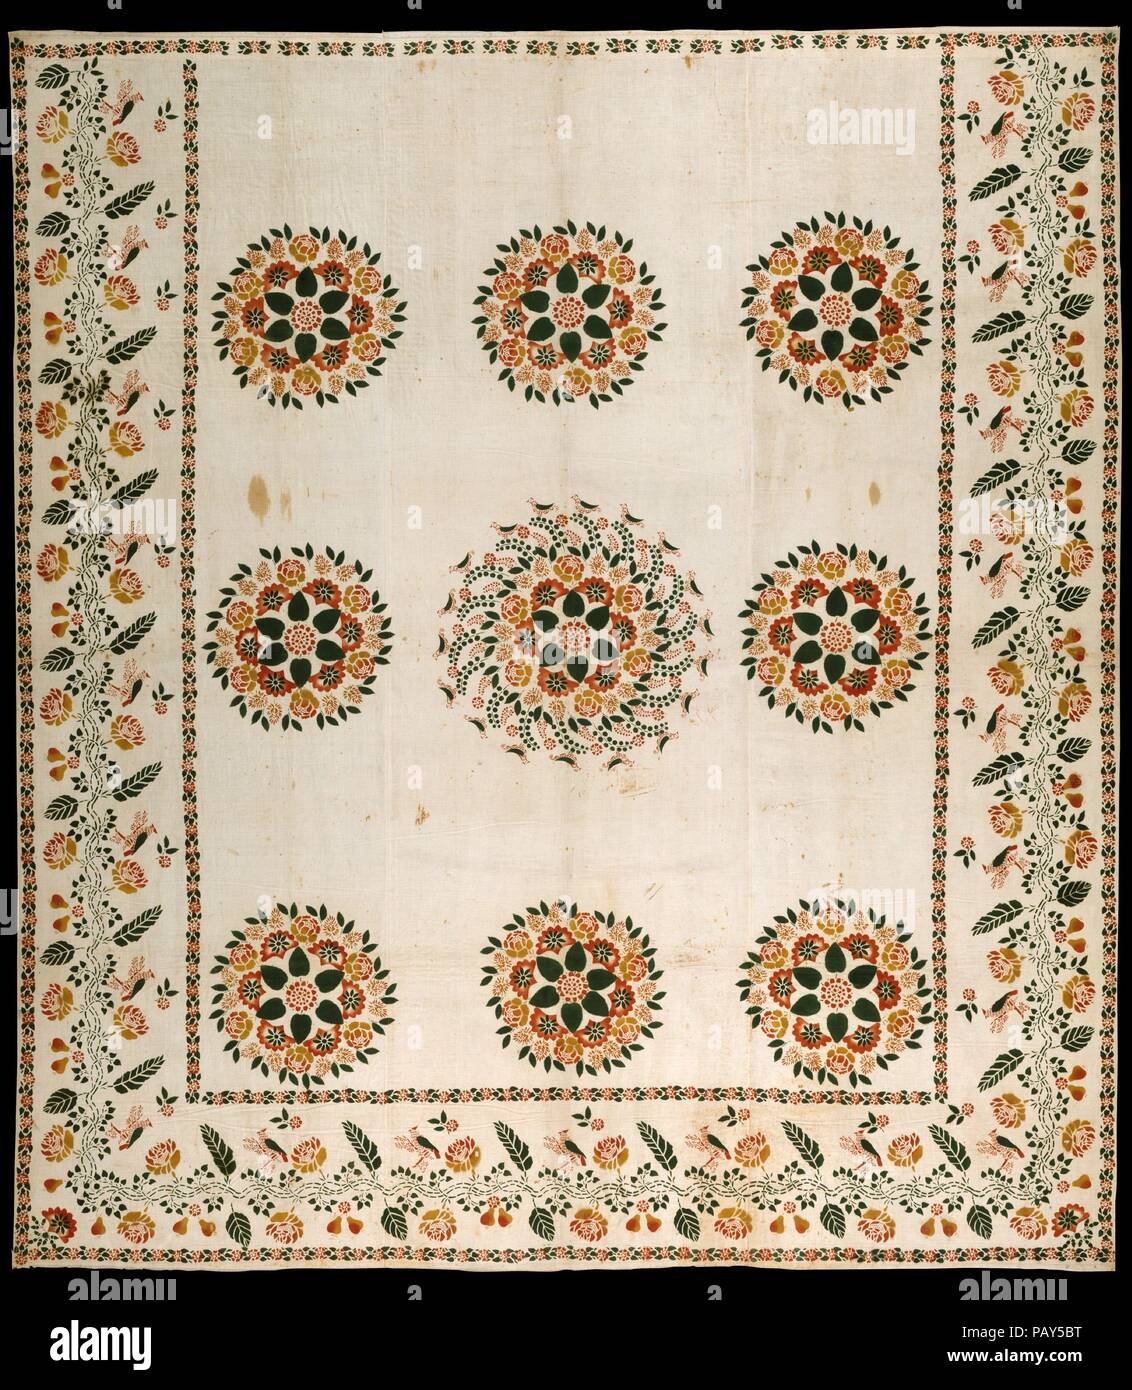 Wholecloth stenciled coverlet. Culture: American. Dimensions: 89 x 81 in. (226.1 x 205.7 cm). Date: ca. 1820-40.  This one-layer coverlet is made of three lengths of white cotton fabric that are seamed together. Red, yellow, and green paints are stenciled on the surface M a pattern of nine medallions with a surrounding border of flowers, fruit, and birds. Museum: Metropolitan Museum of Art, New York, USA. Stock Photo